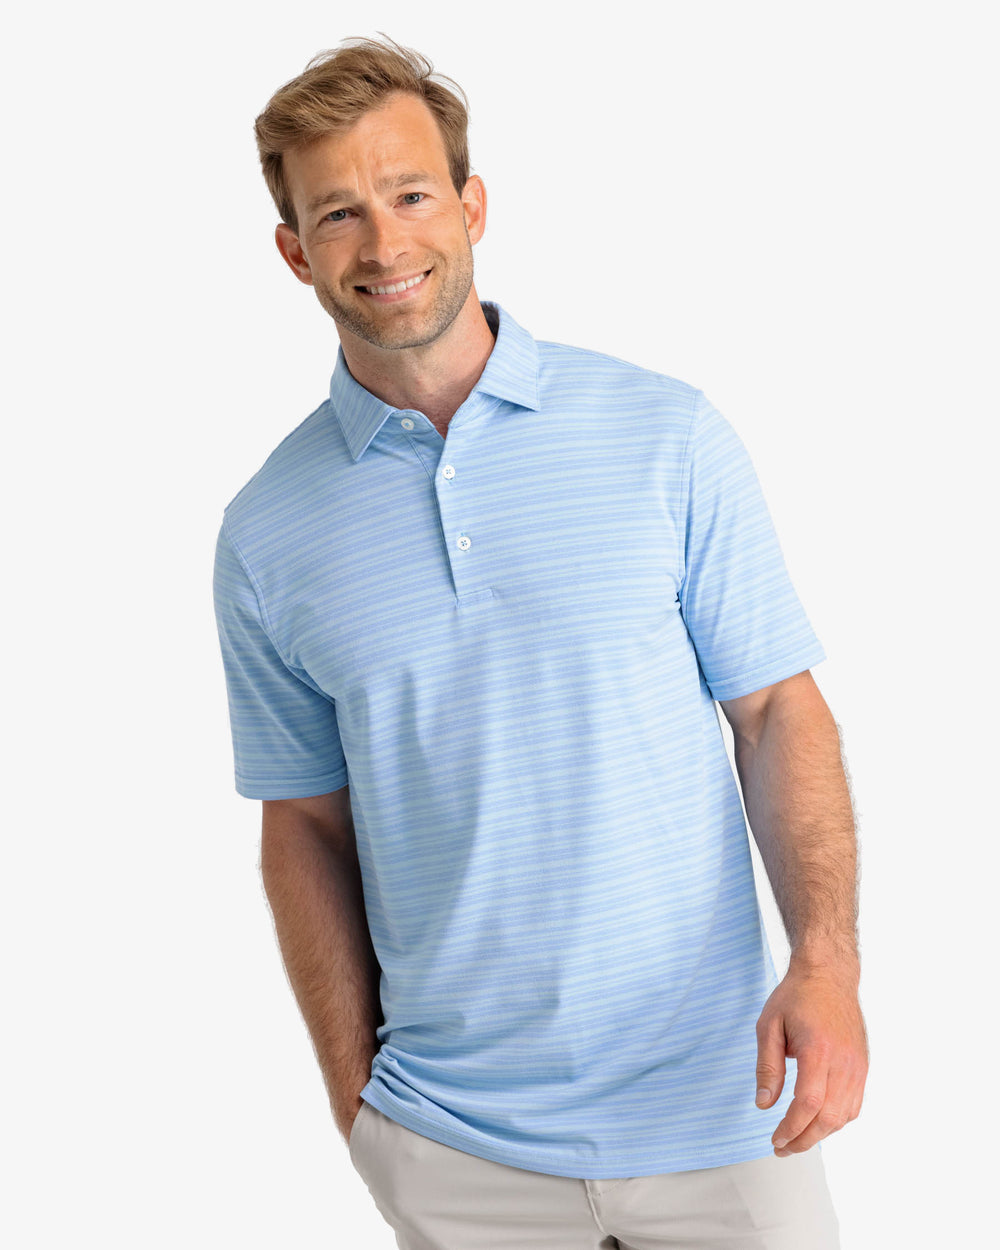 The front view of the Southern Tide Ryder Heather Bombay Striped Polo Shirt by Southern Tide - Heather Boat Blue